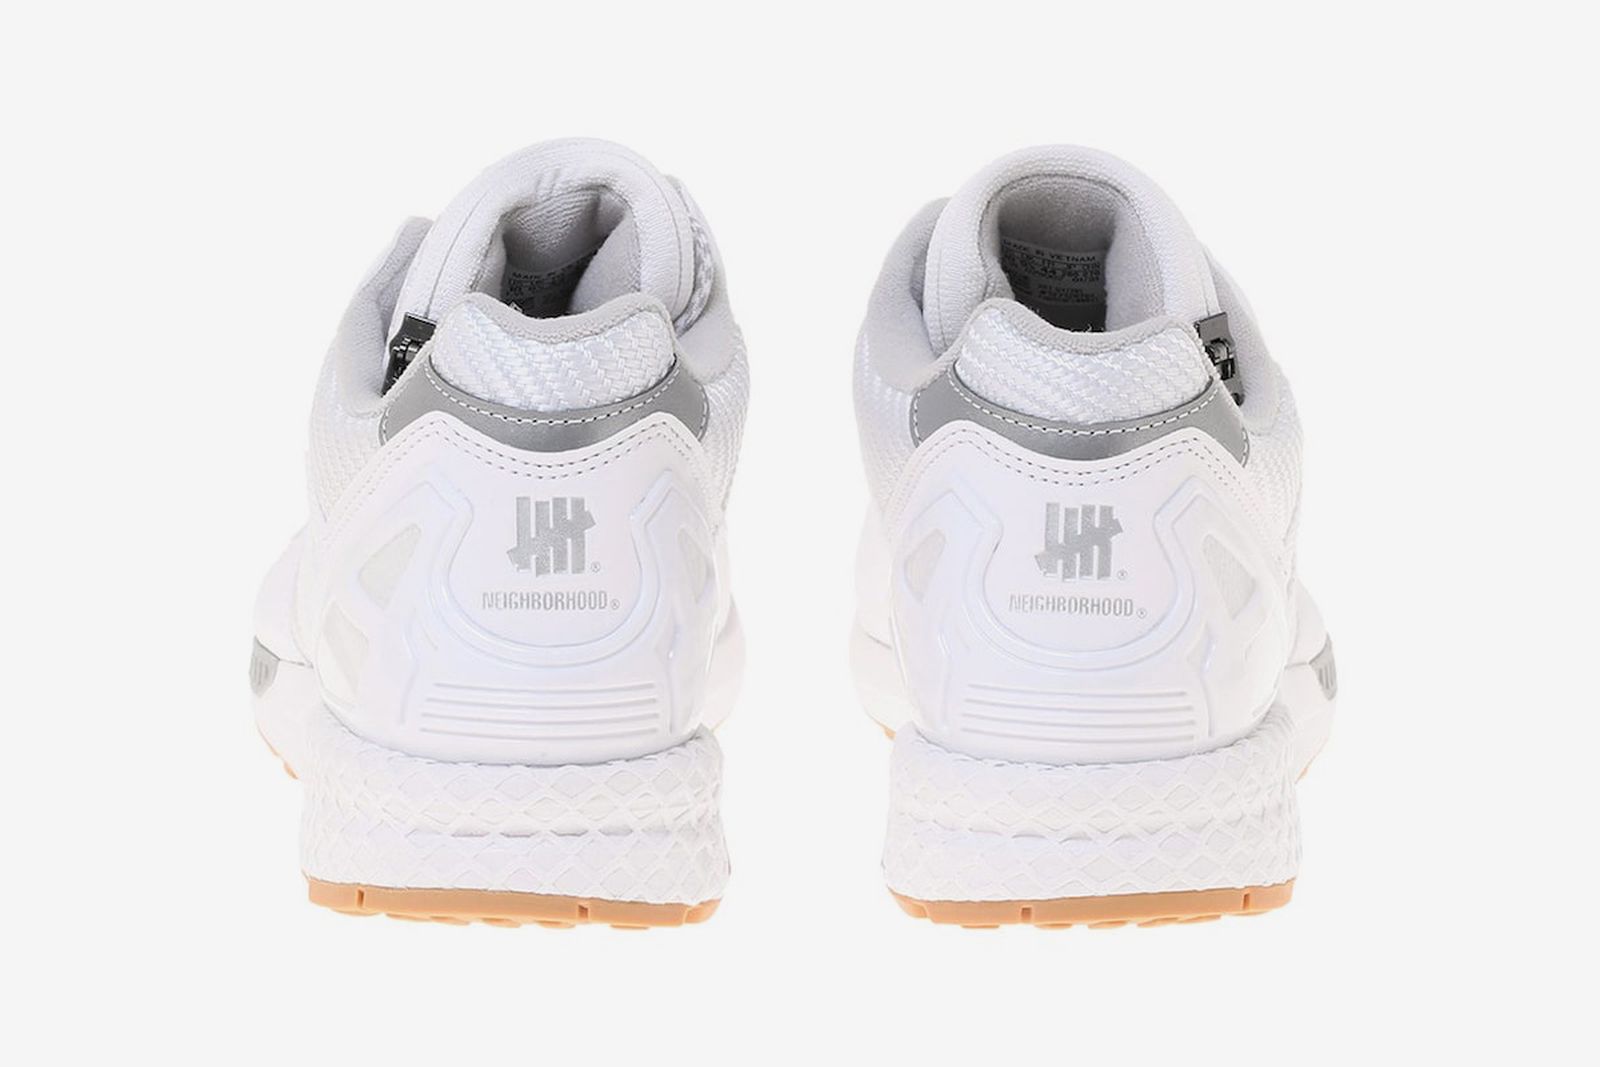 NBHD x UNDFTD x adidas ZX 8000: Release Date & Official Images